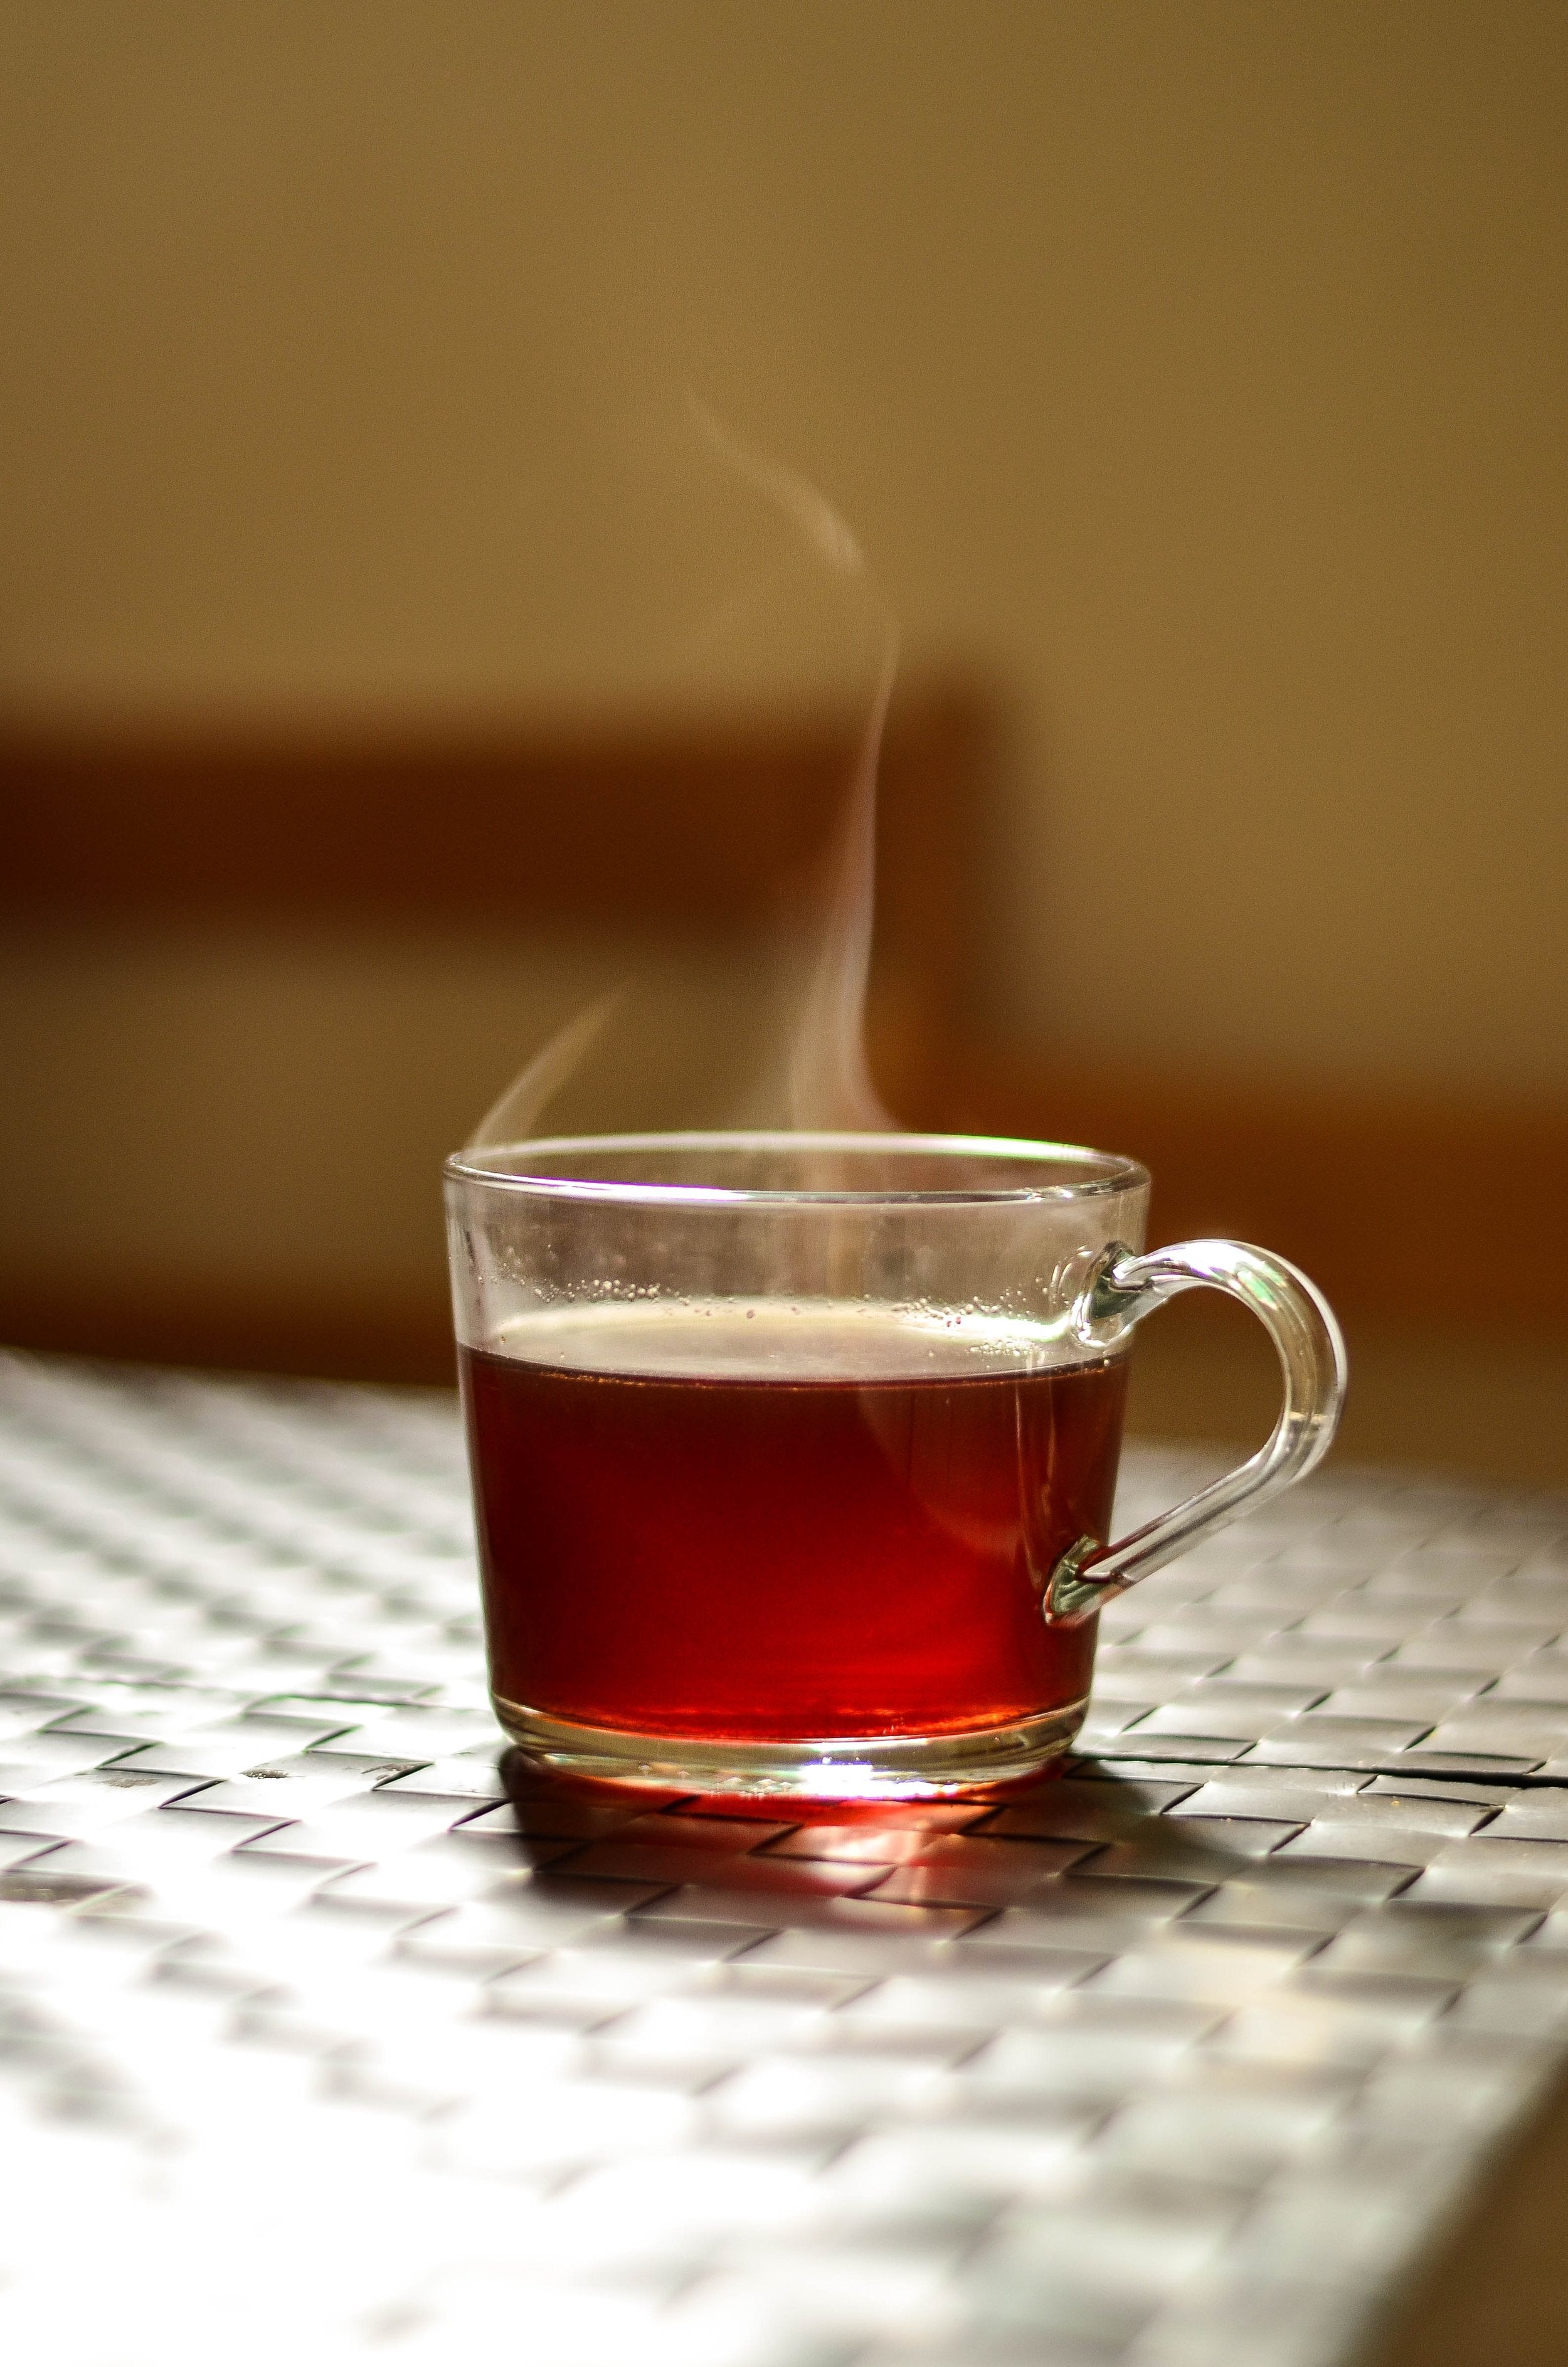 Brewed Mamaki tea is a rich red hue.